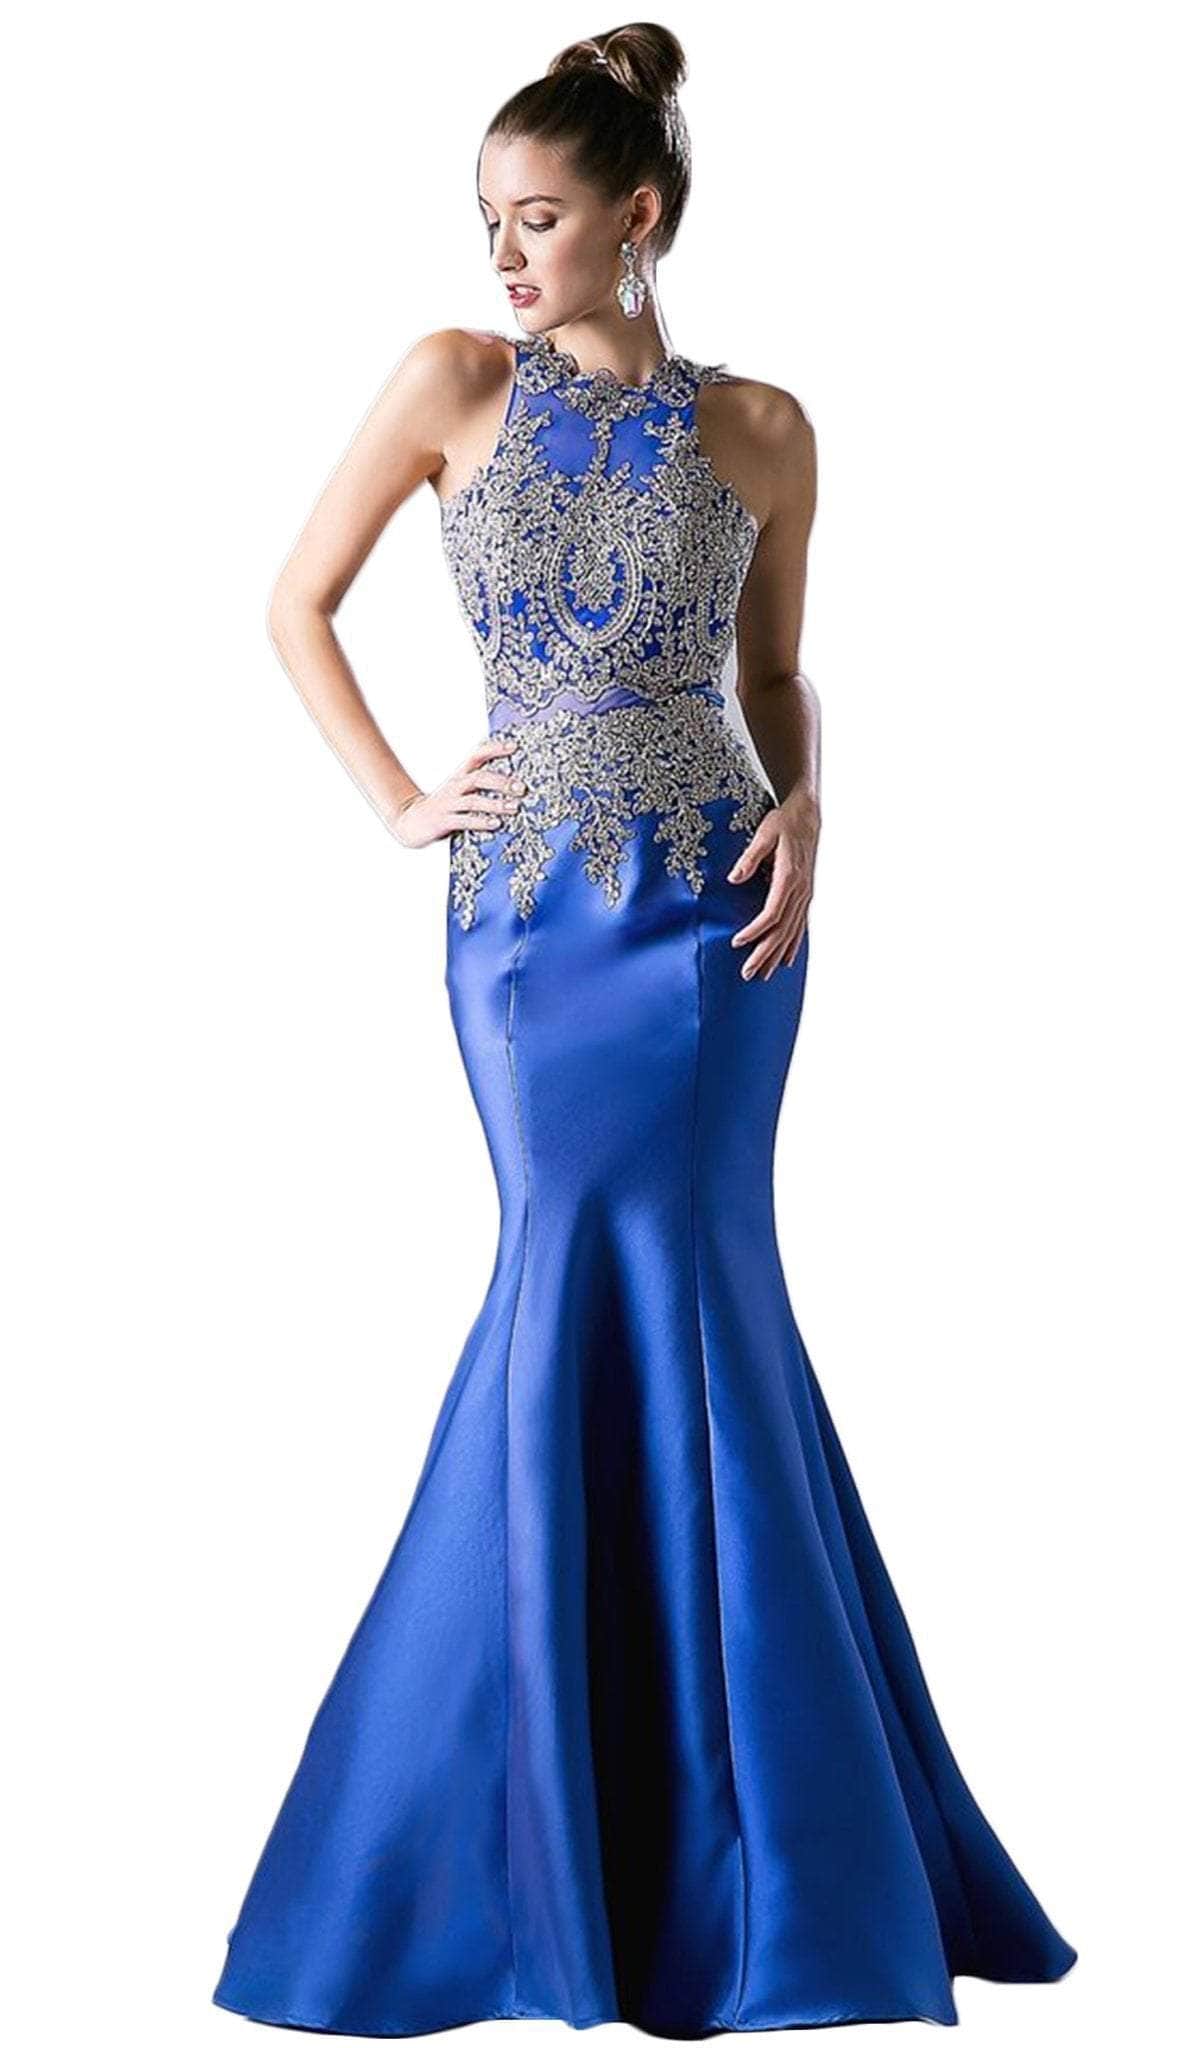 Ladivine 8934 Special Occasion Dress 2 / Royal